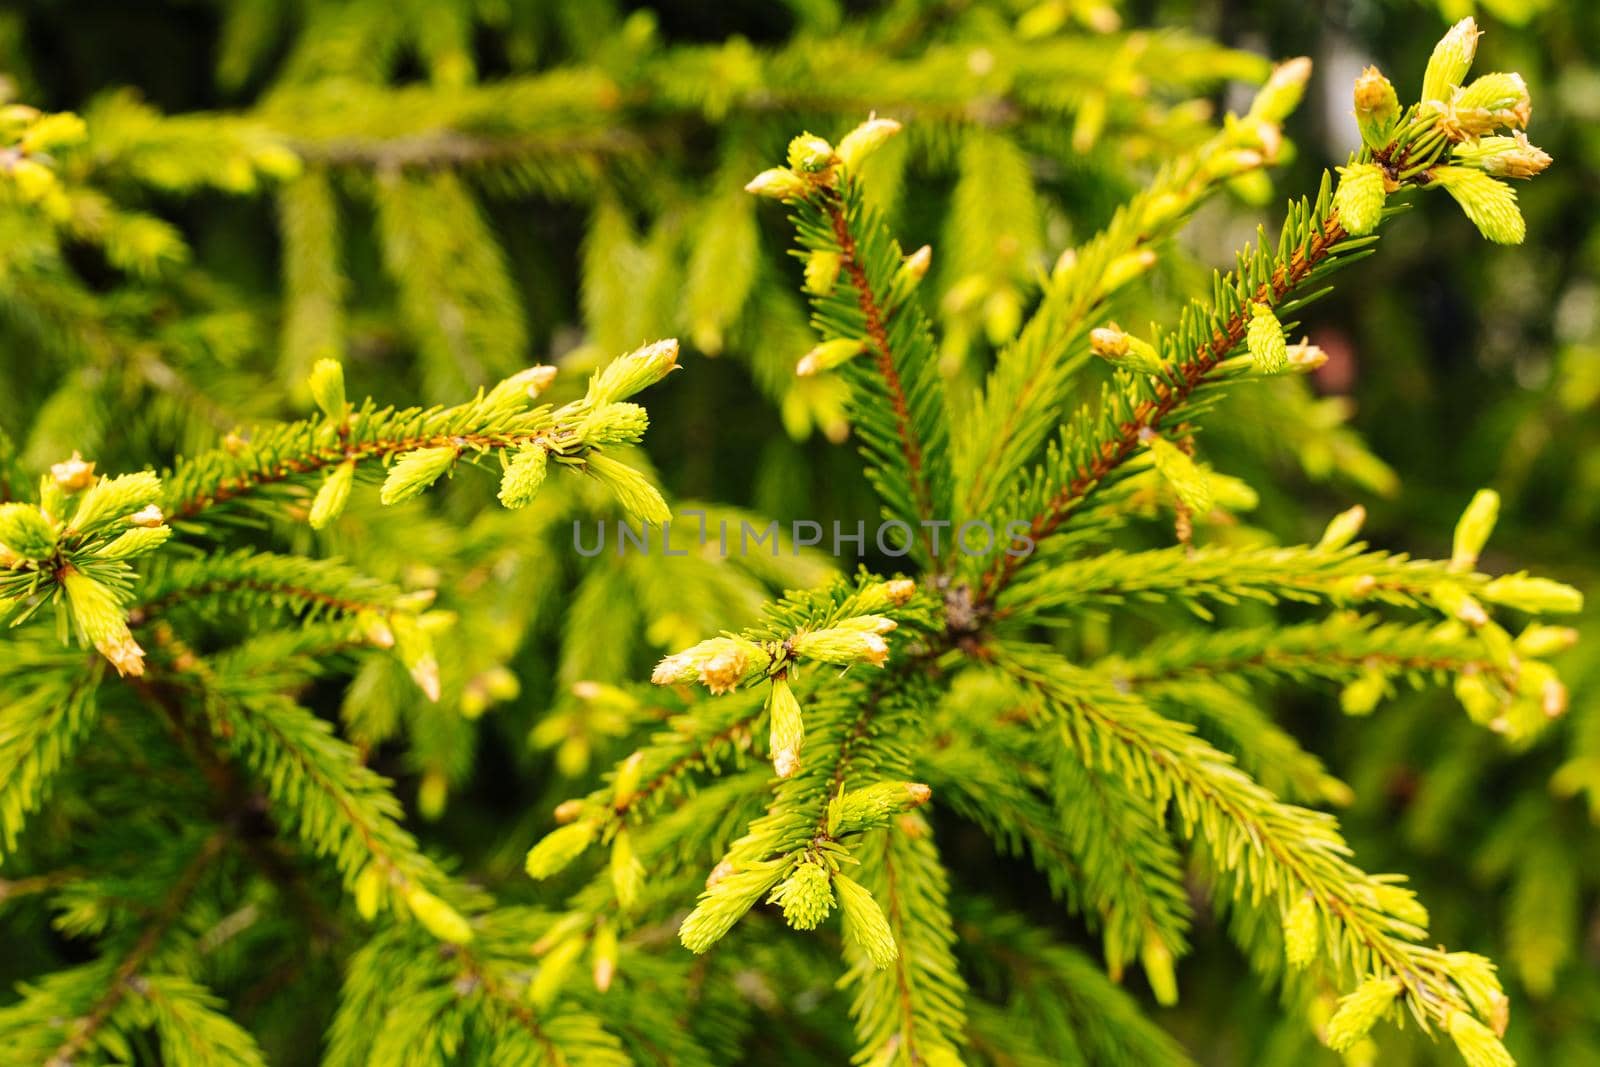 young buds and shoots on the branches of a green Christmas tree by audiznam2609